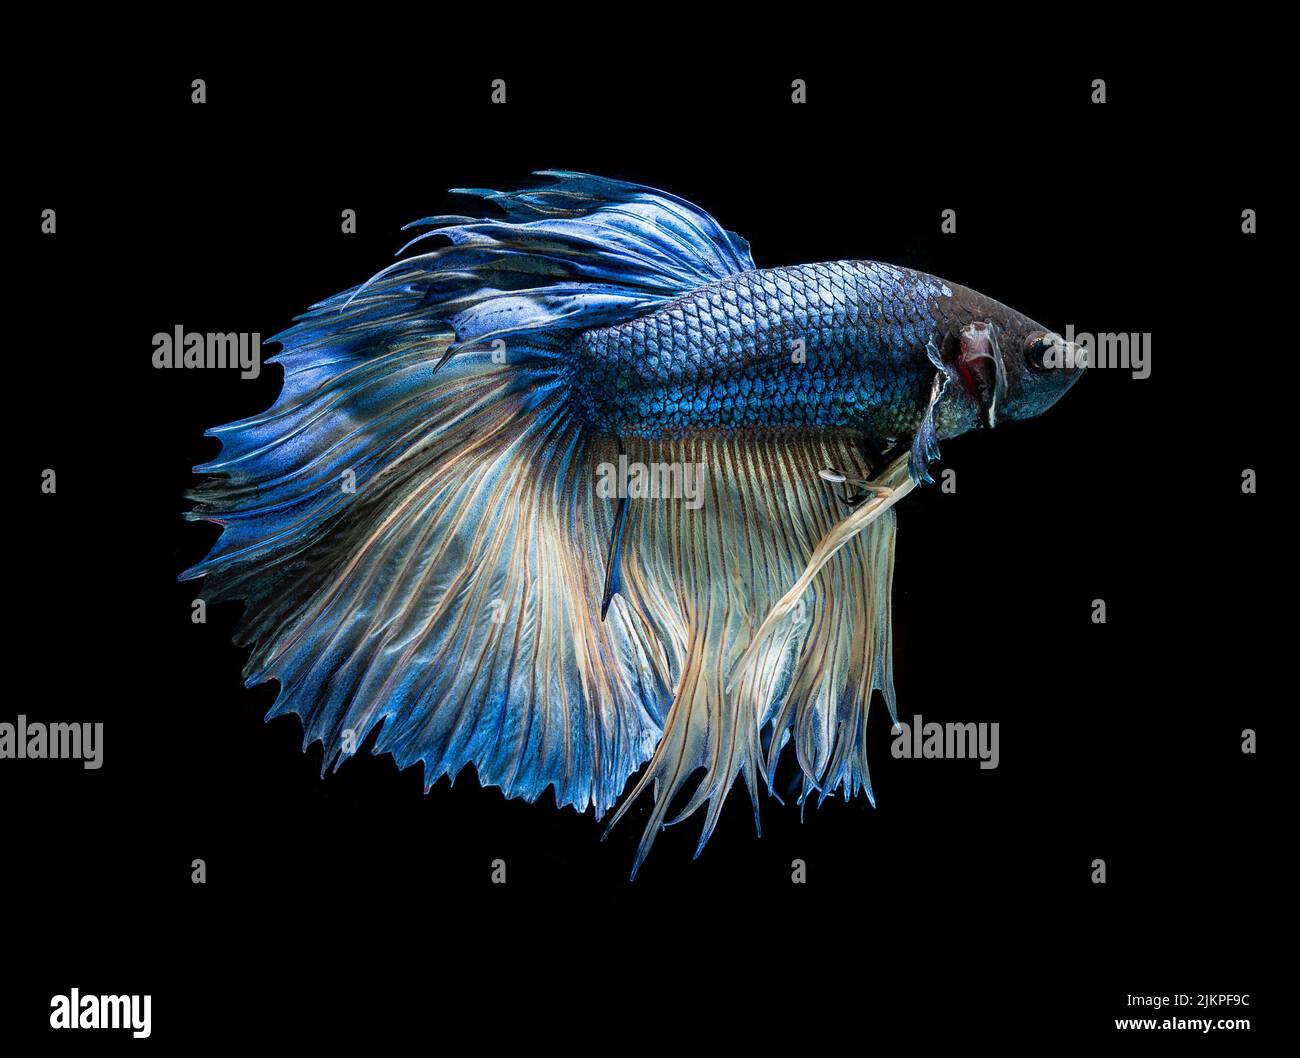 A closeup shot of a betta fish isolated on a black background Stock Photo